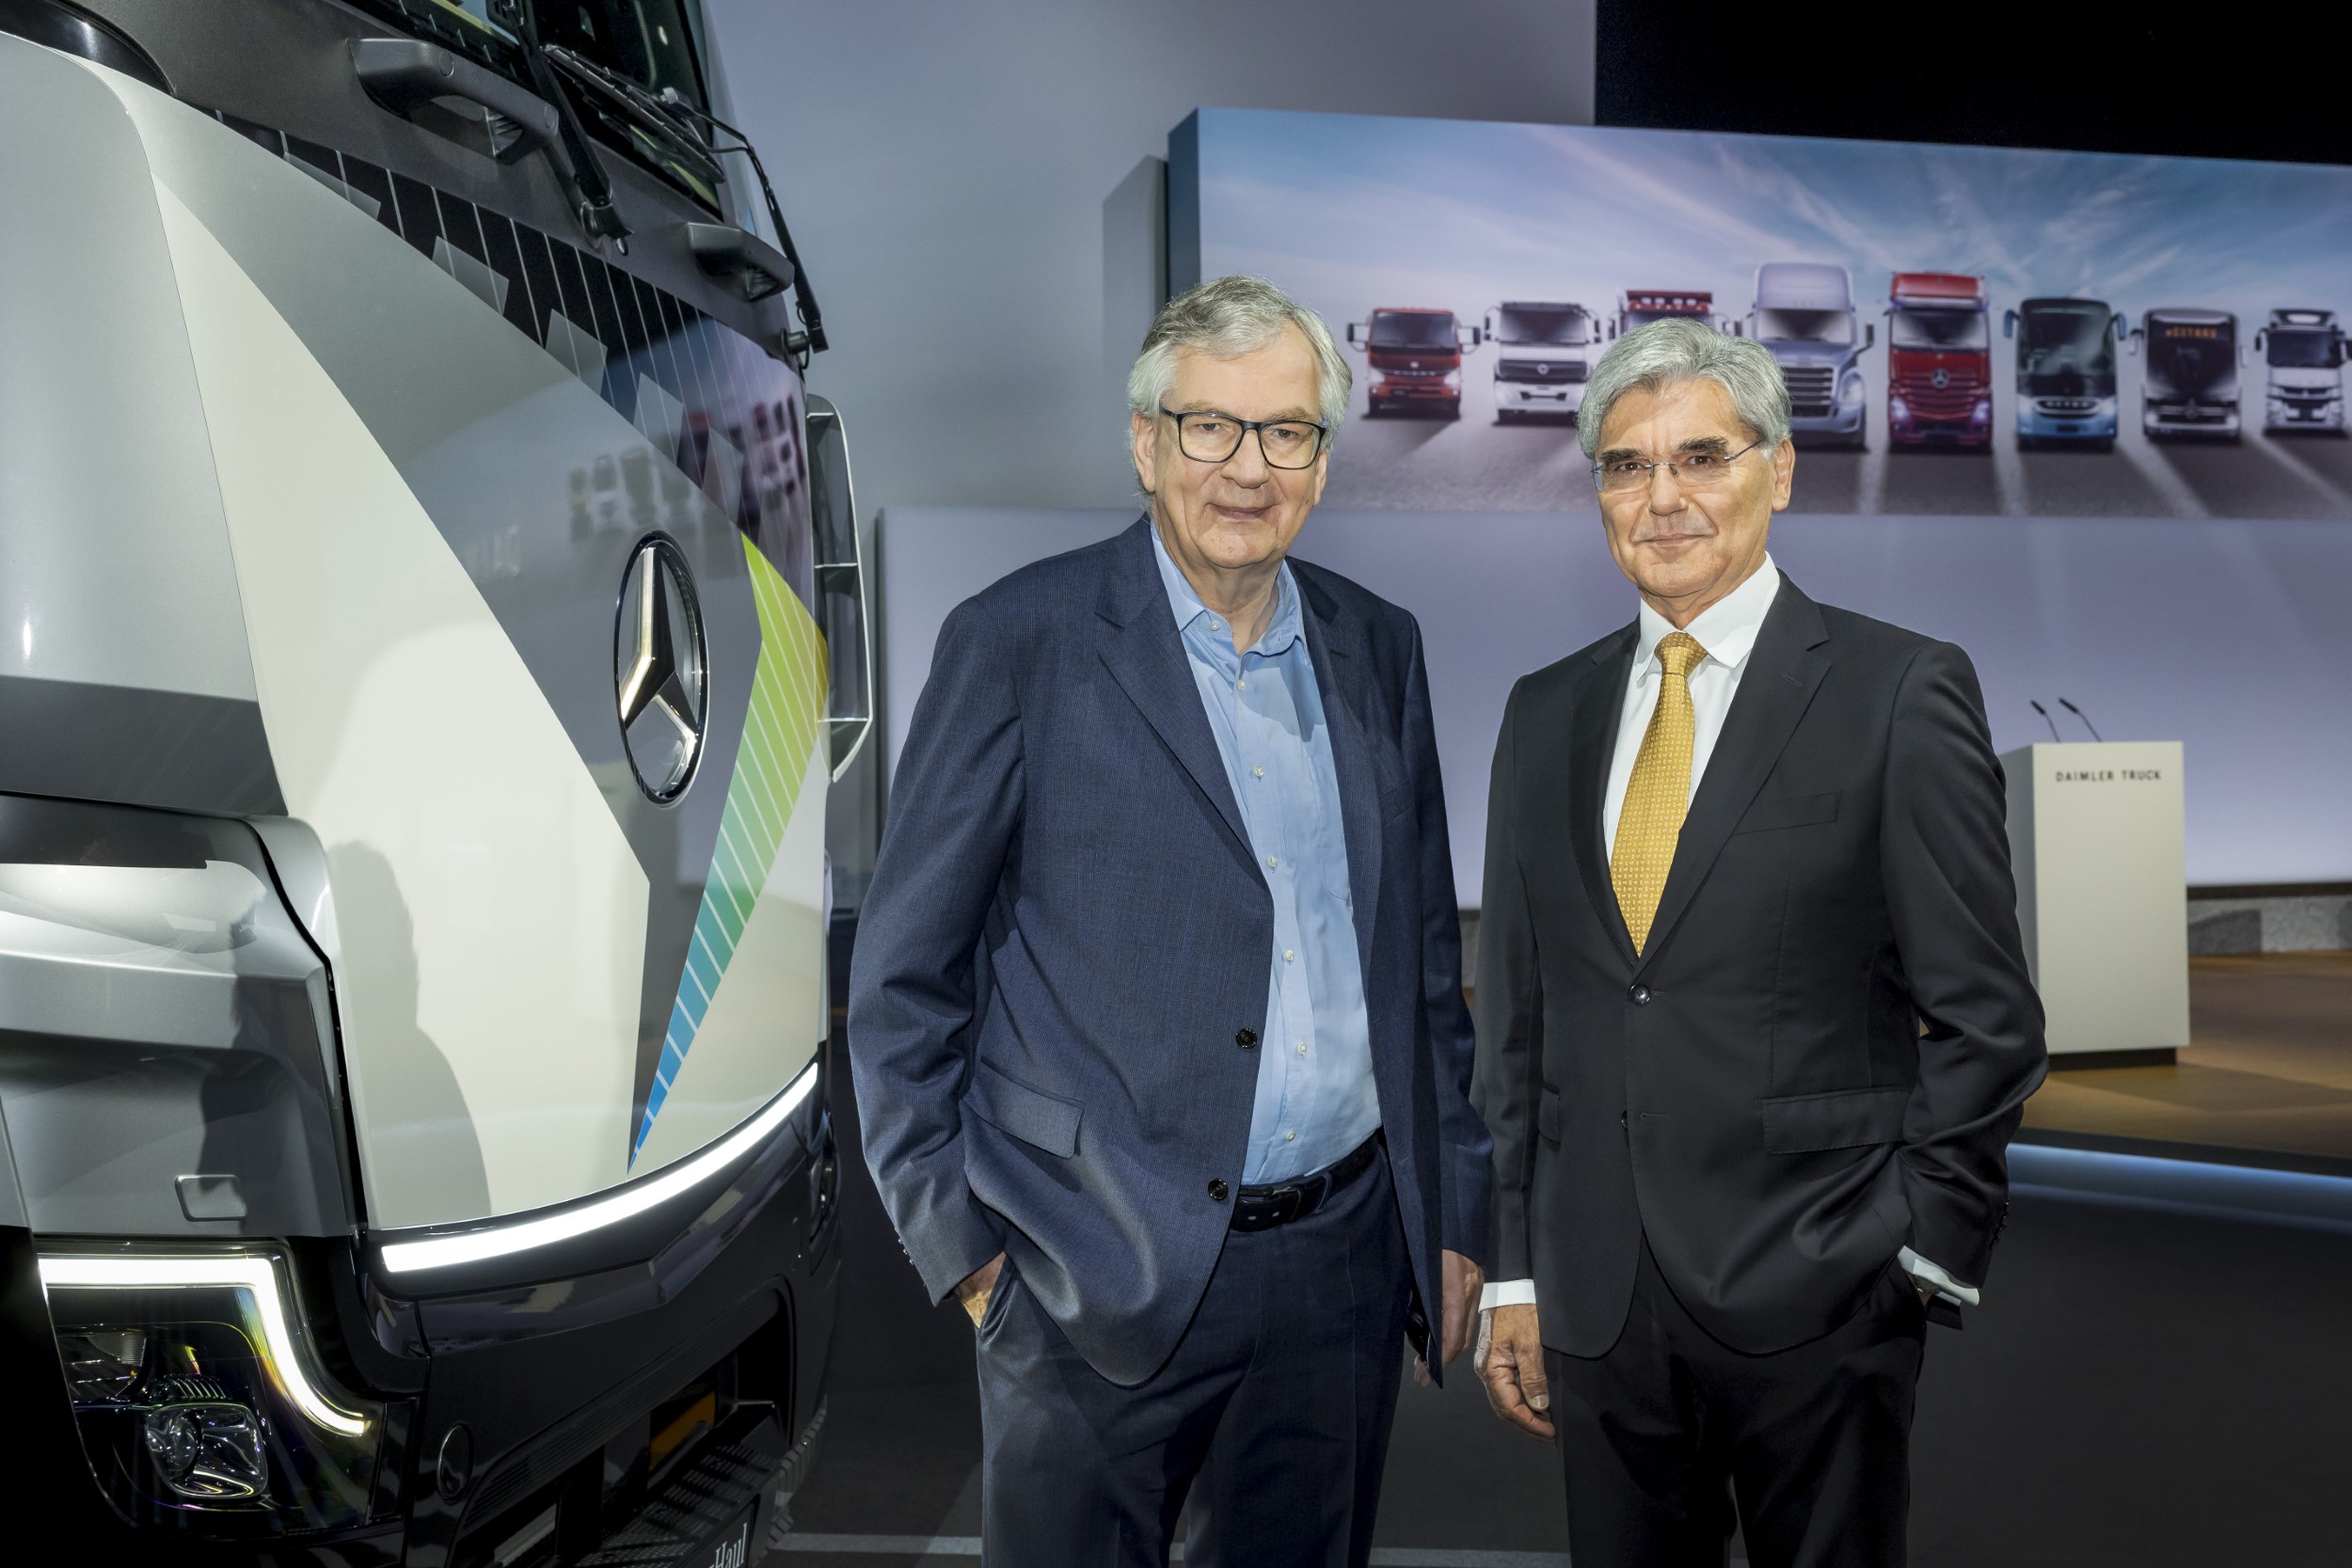 Daimler Truck Holding AG's Annual General Meeting (from left to right): Martin Daum and Joe Kaeser